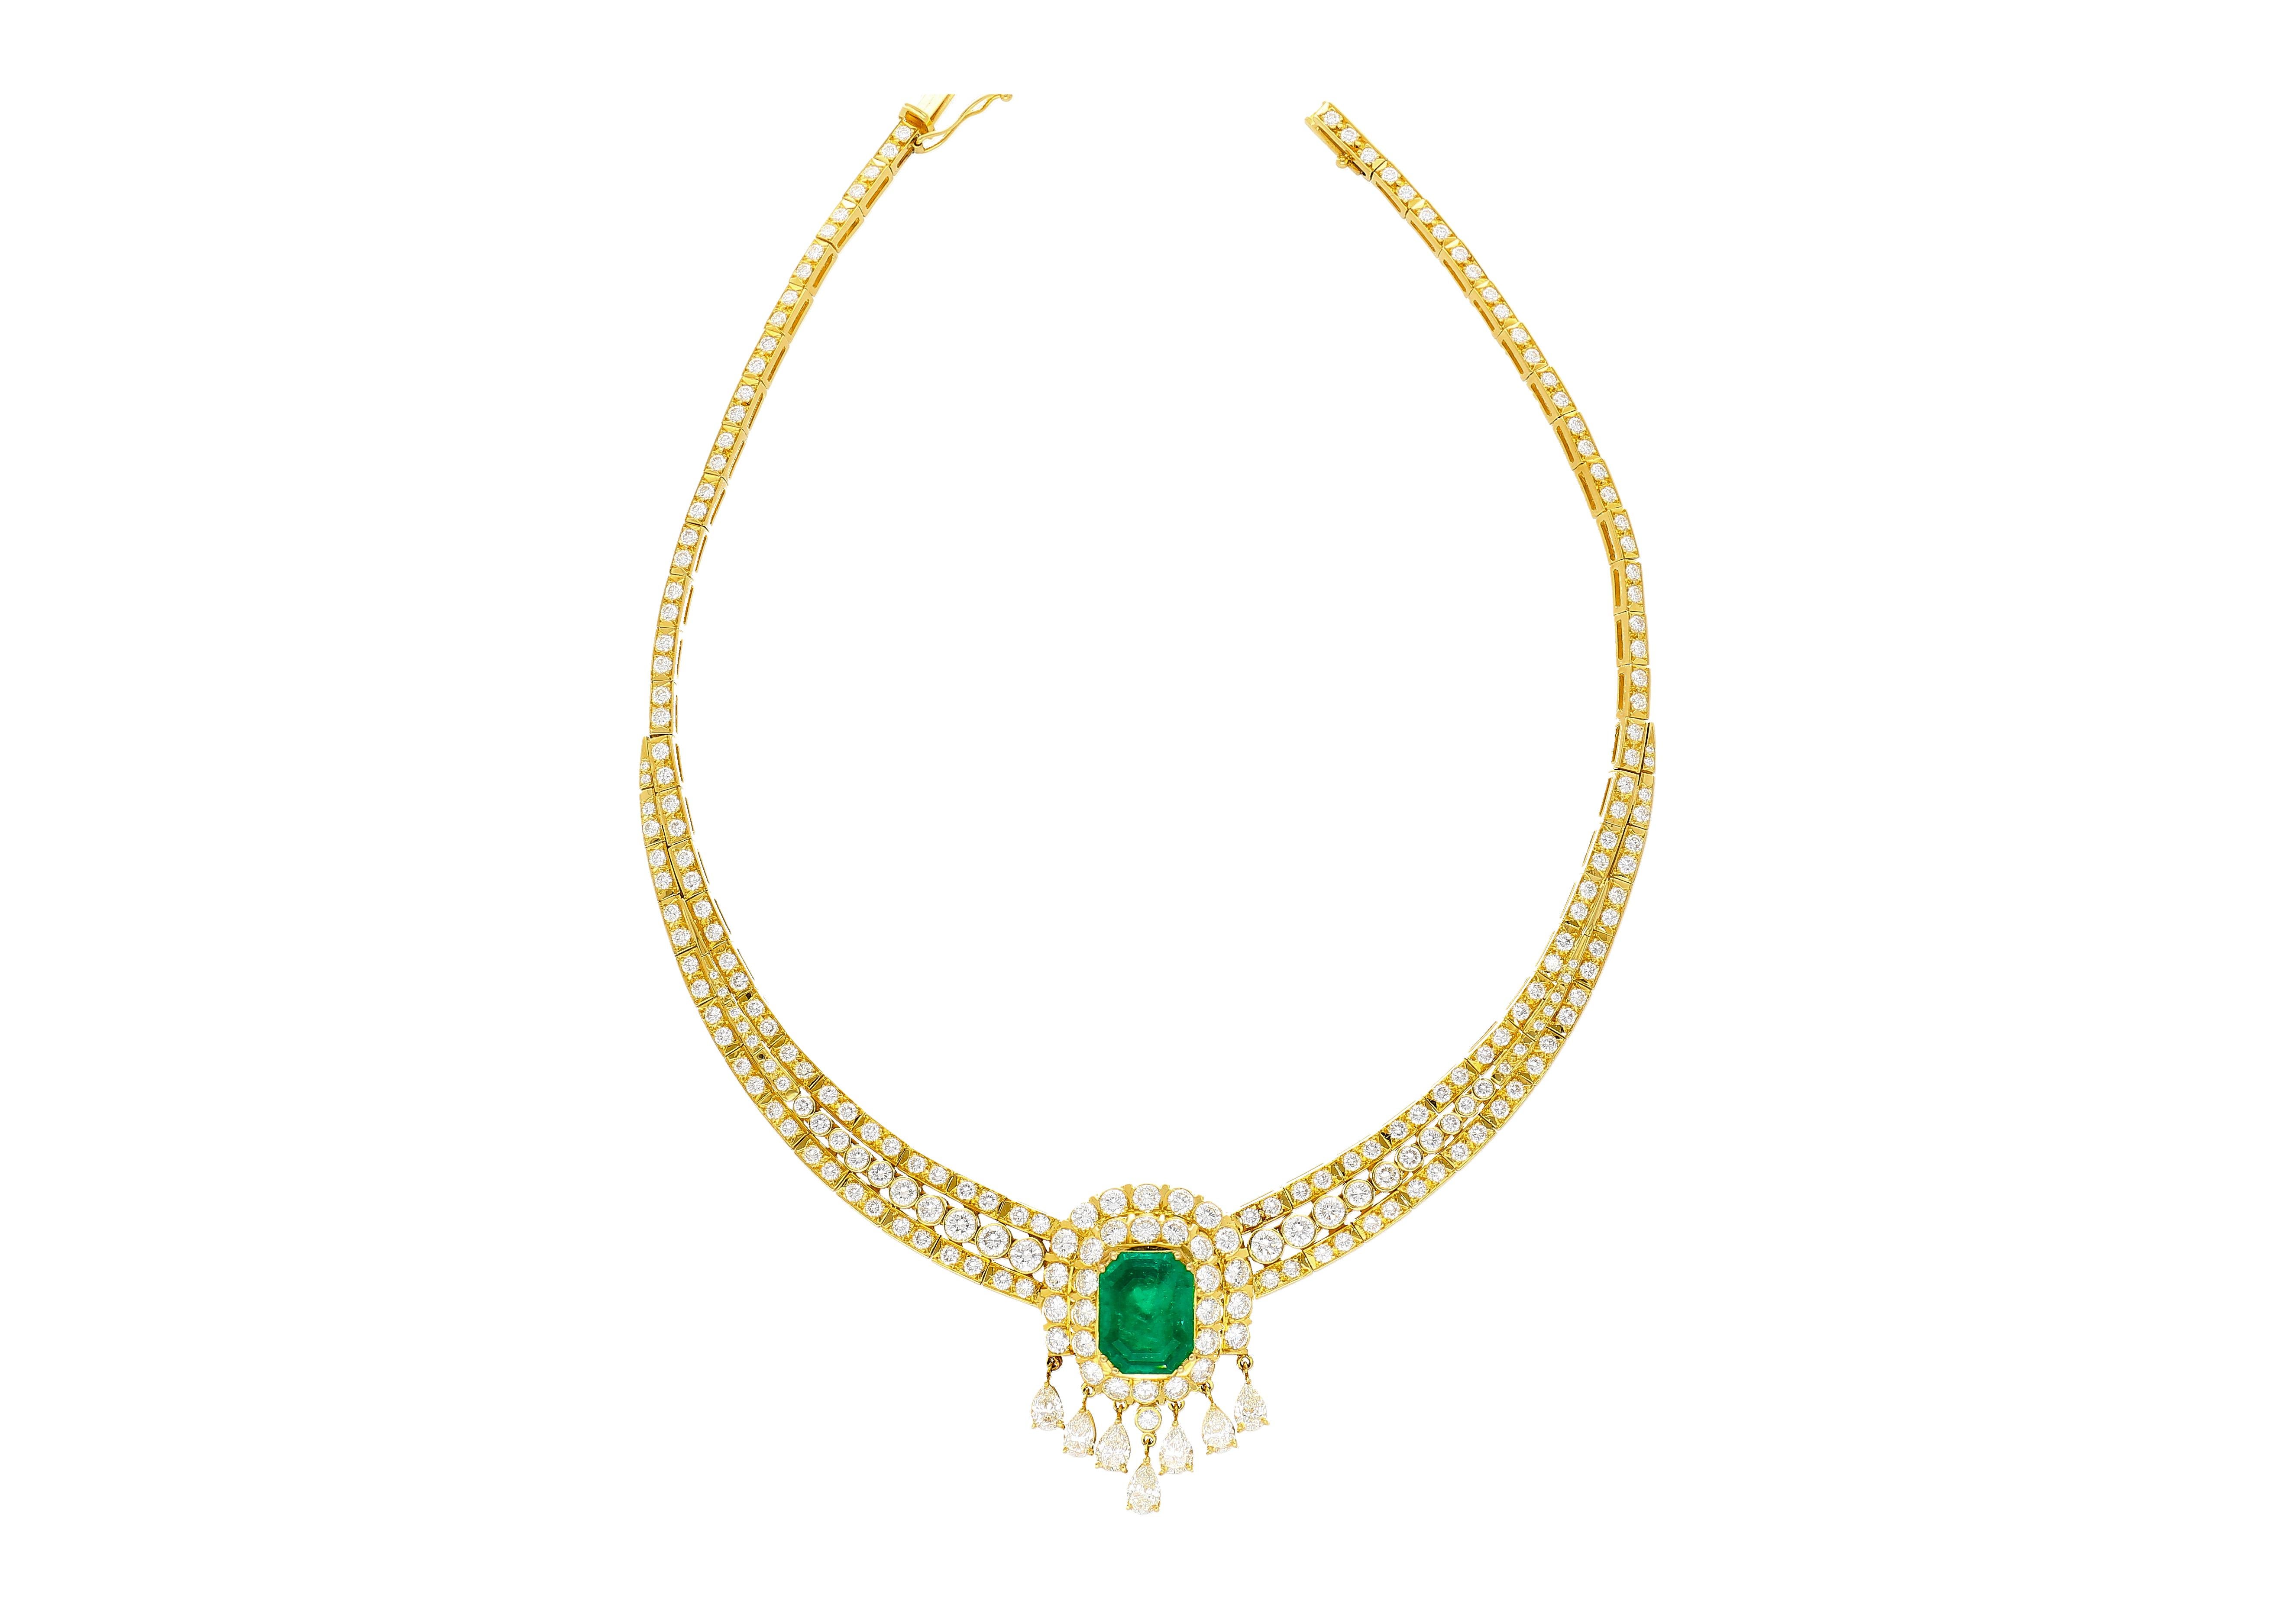 27.42 Carat total natural Colombian emerald and diamond chandelier regal design choker necklace in 18k solid yellow gold. The Emerald is eye-clean, full of life, and has no sruface level inclusions. Bearing insignificant oil treatment and GRS